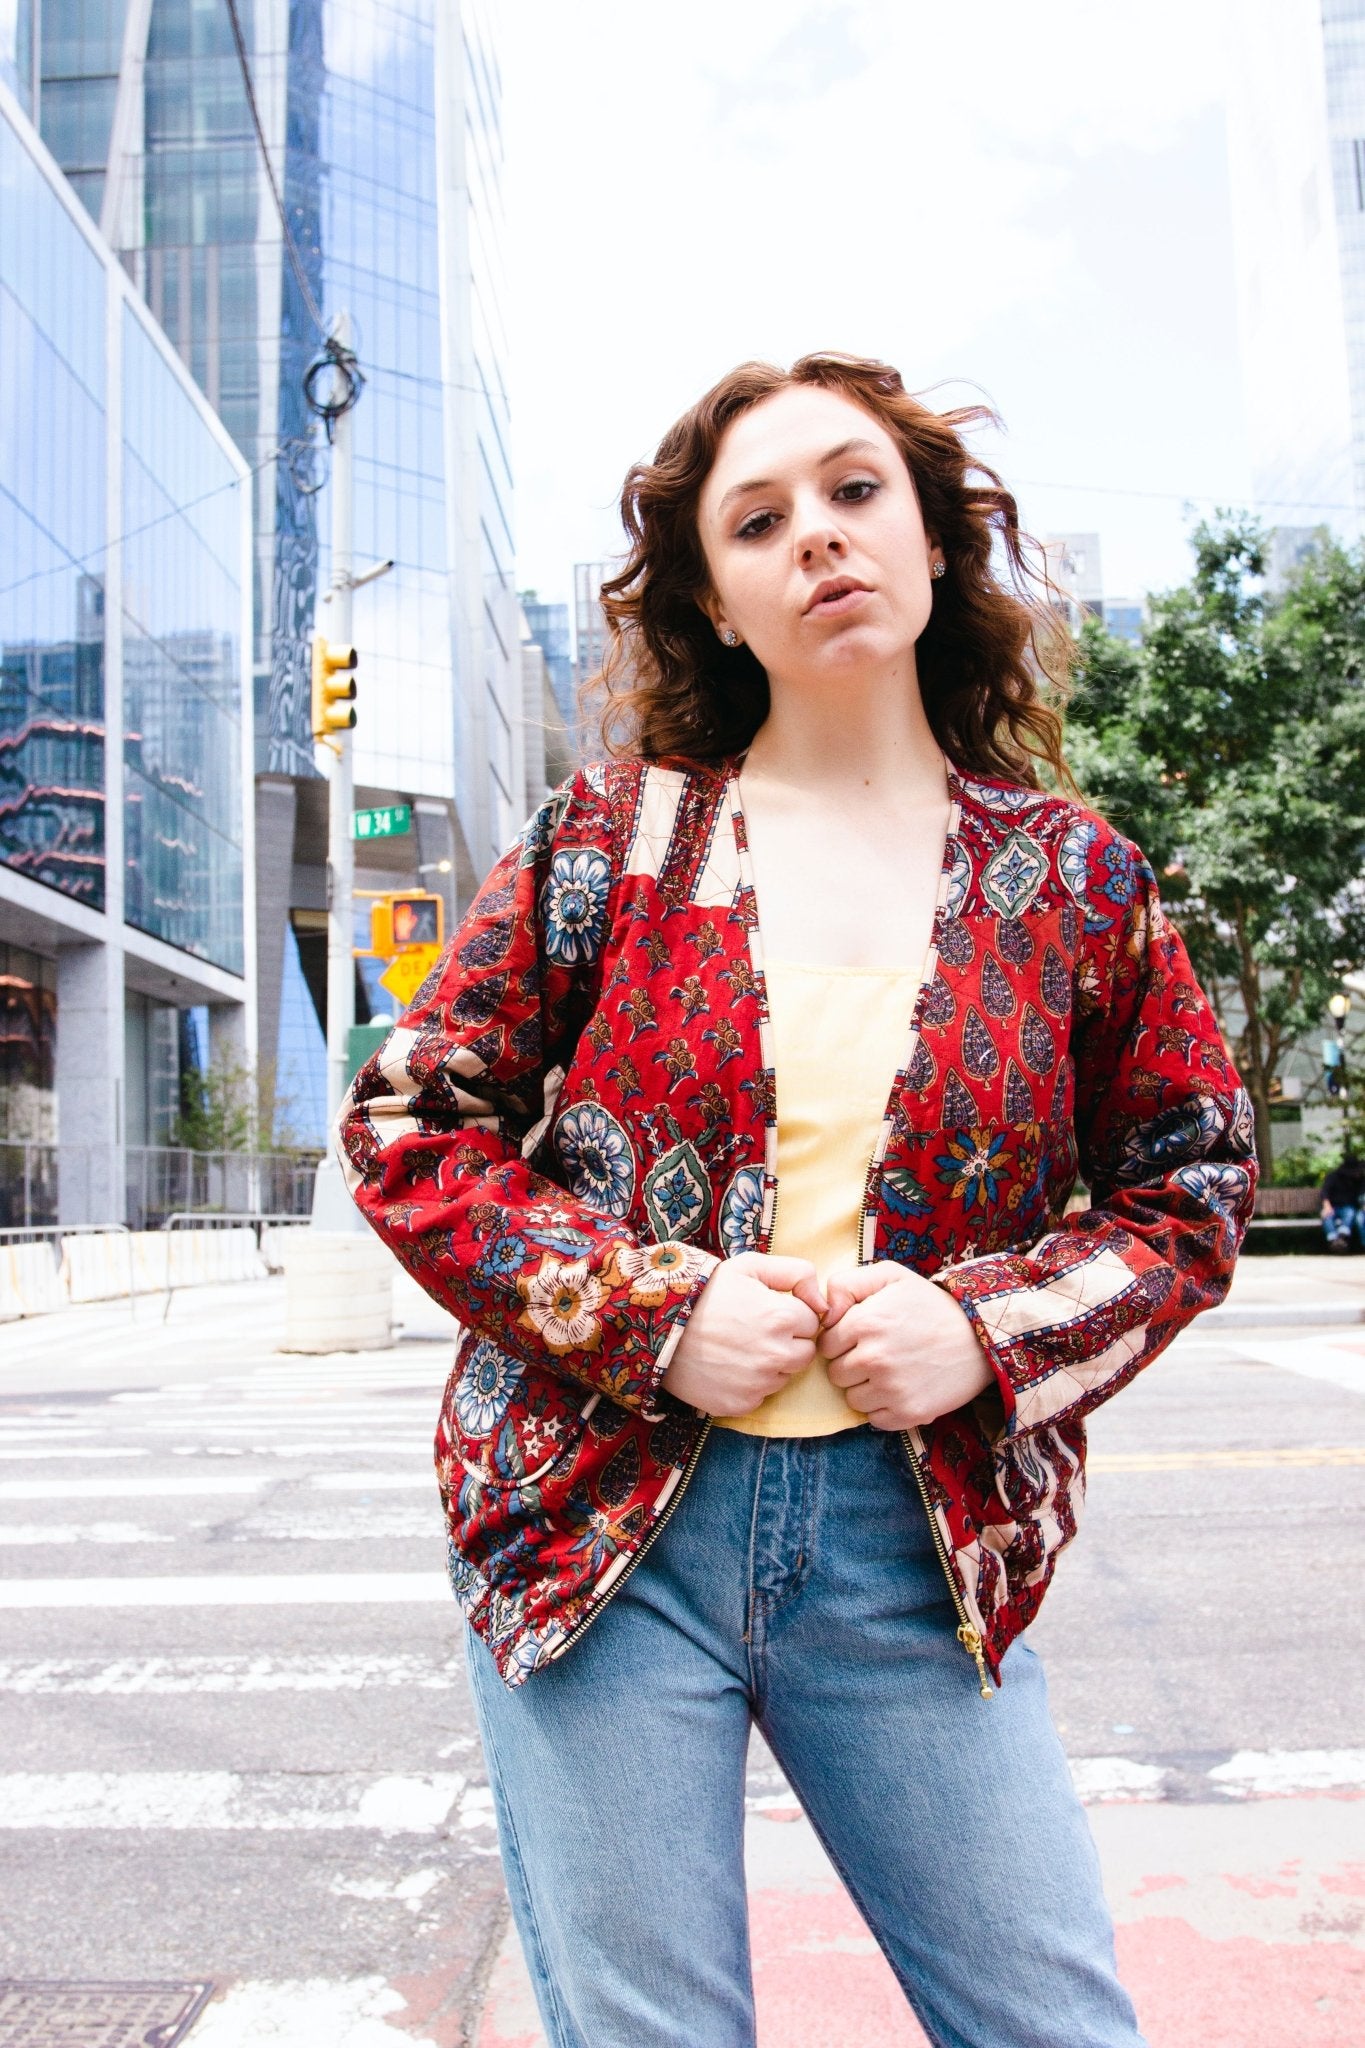 Block Printed Quilted Bomber Jacket - CHYATEE